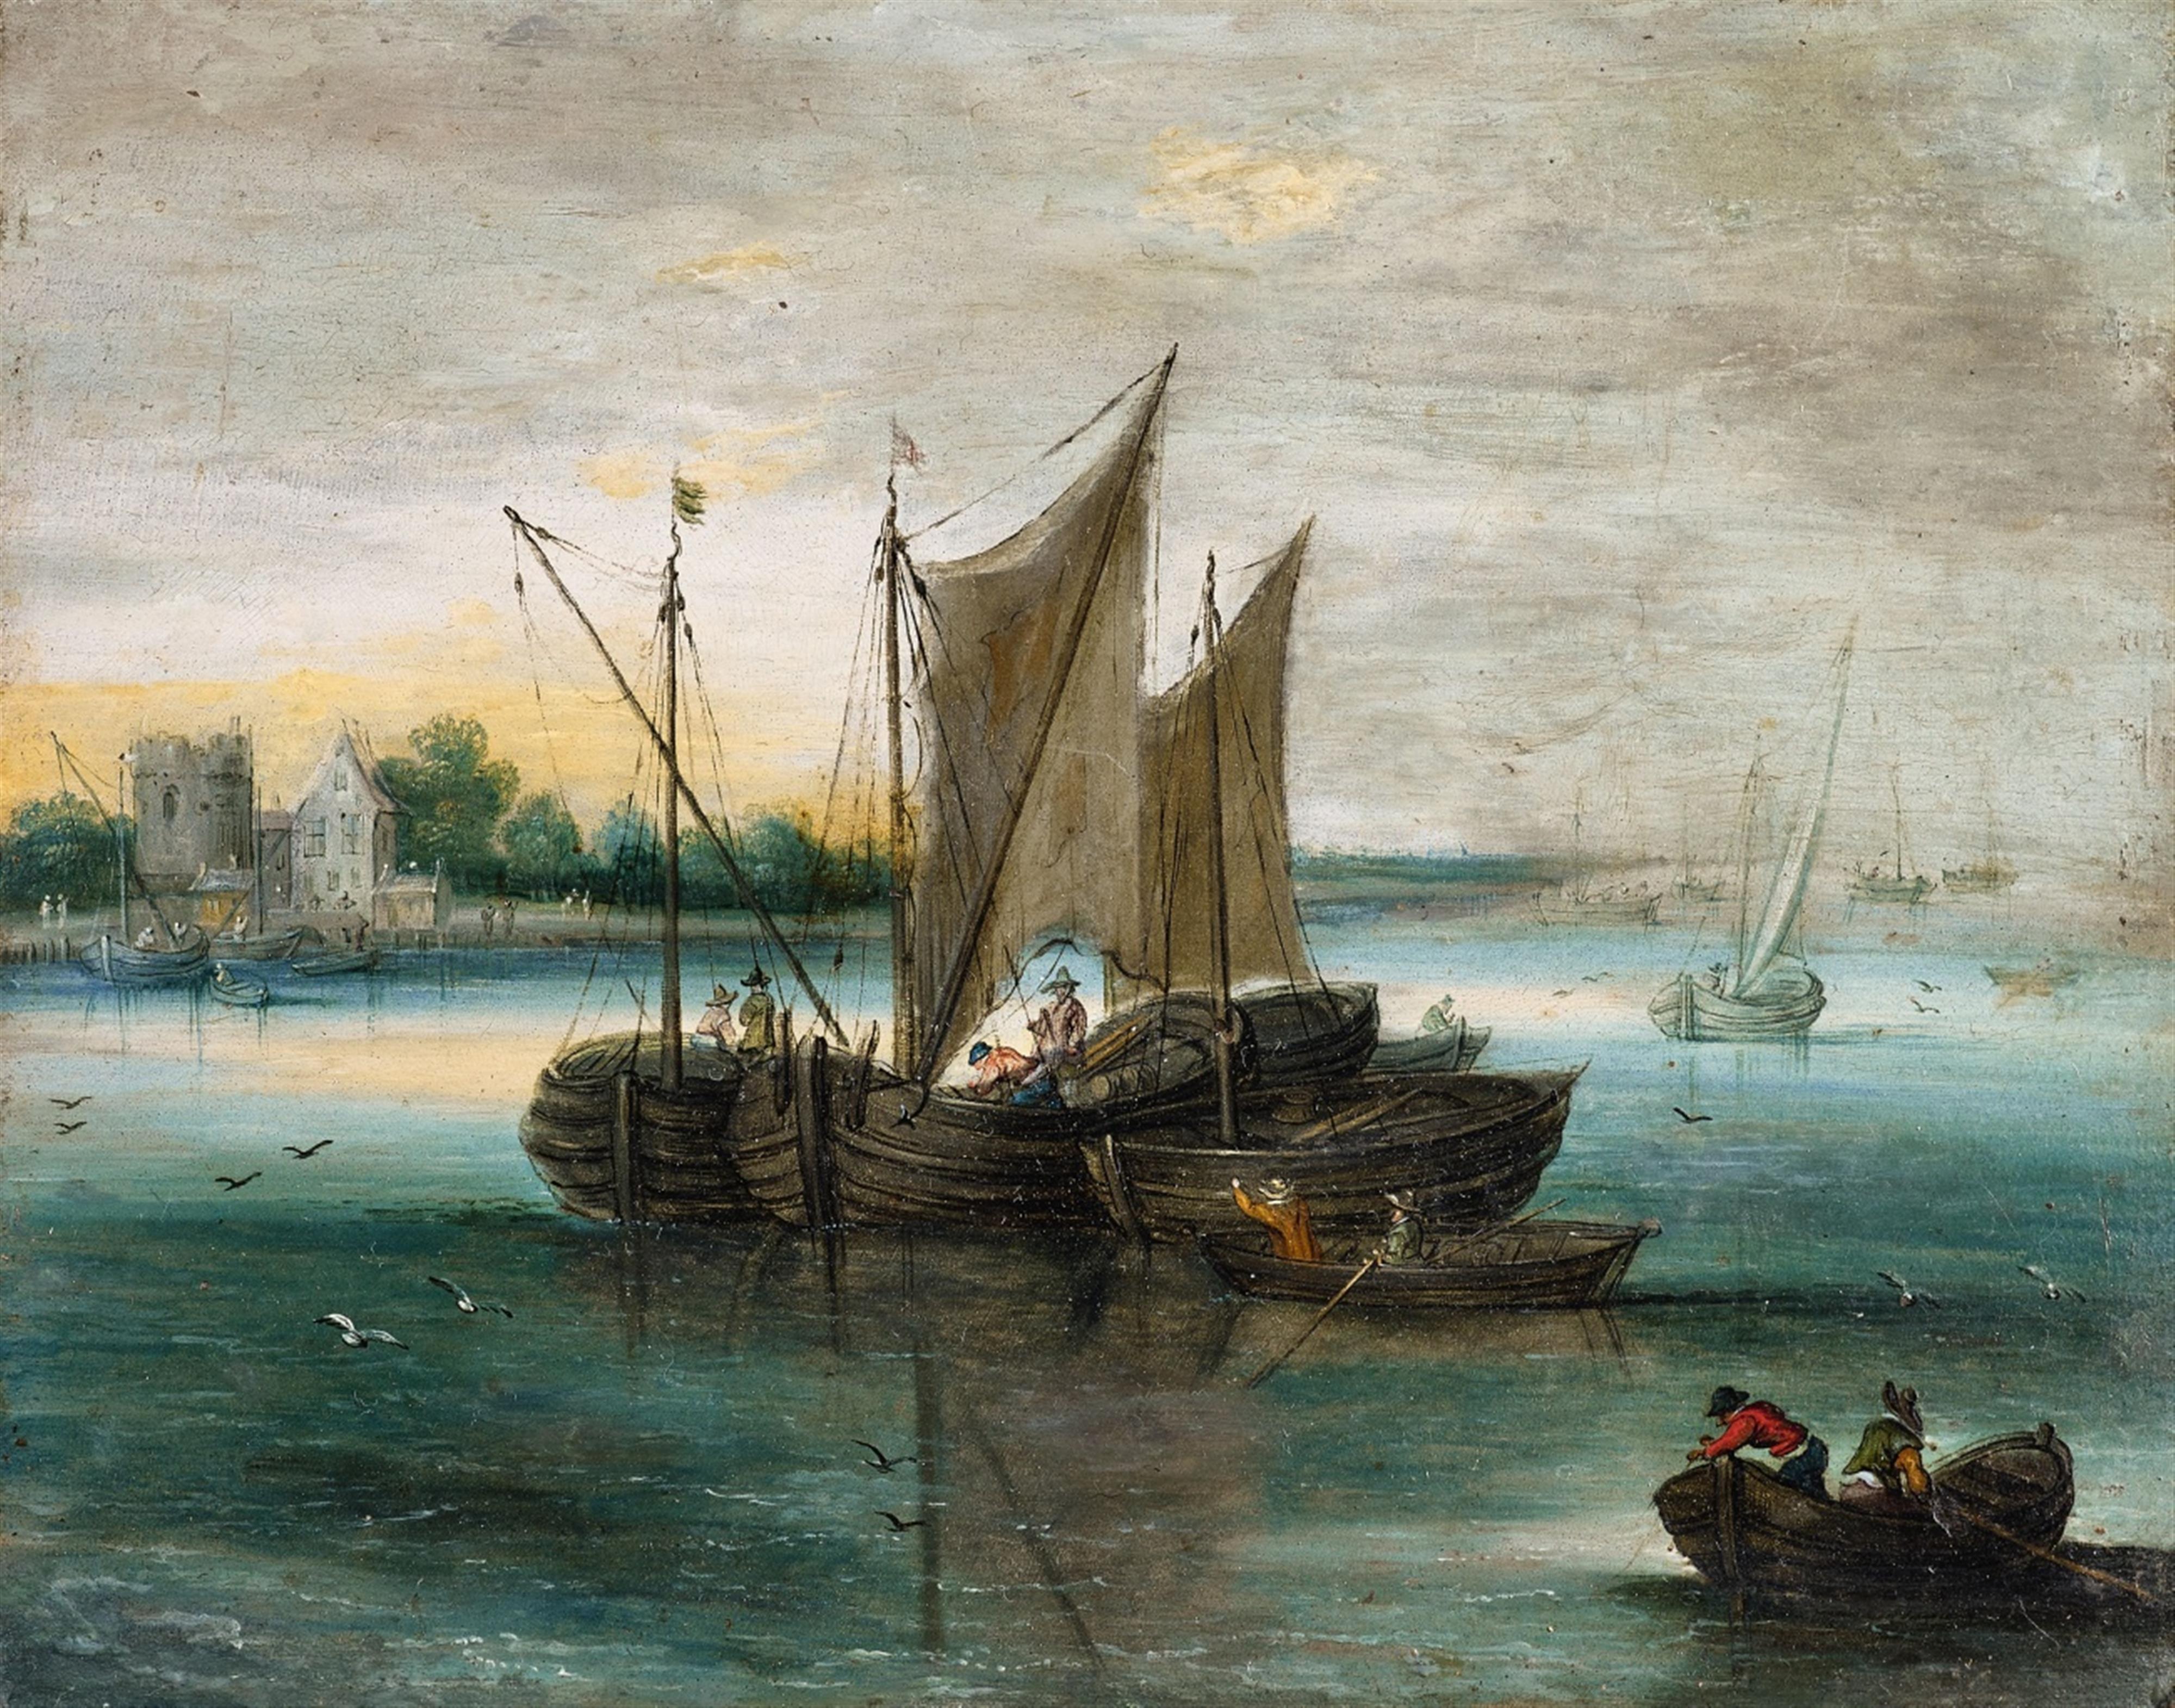 Jan Brueghel the Younger - Seascape with Boats on the Water - image-1